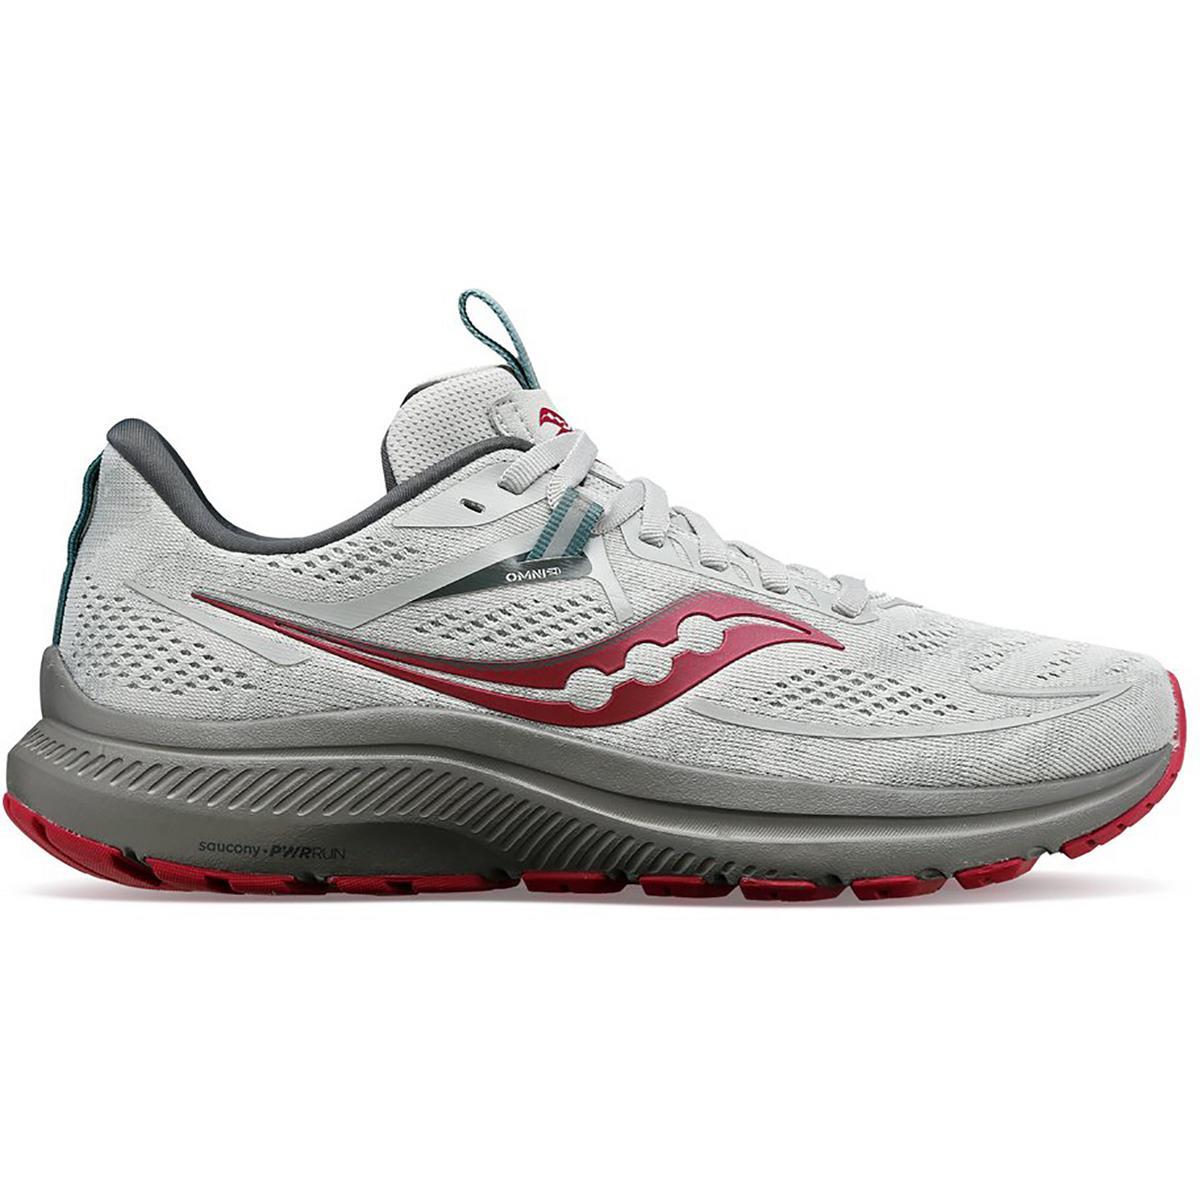 Saucony Womens Omni 21 Skyway Running Training Shoes Sneakers Bhfo 3315 Concrete/Berry